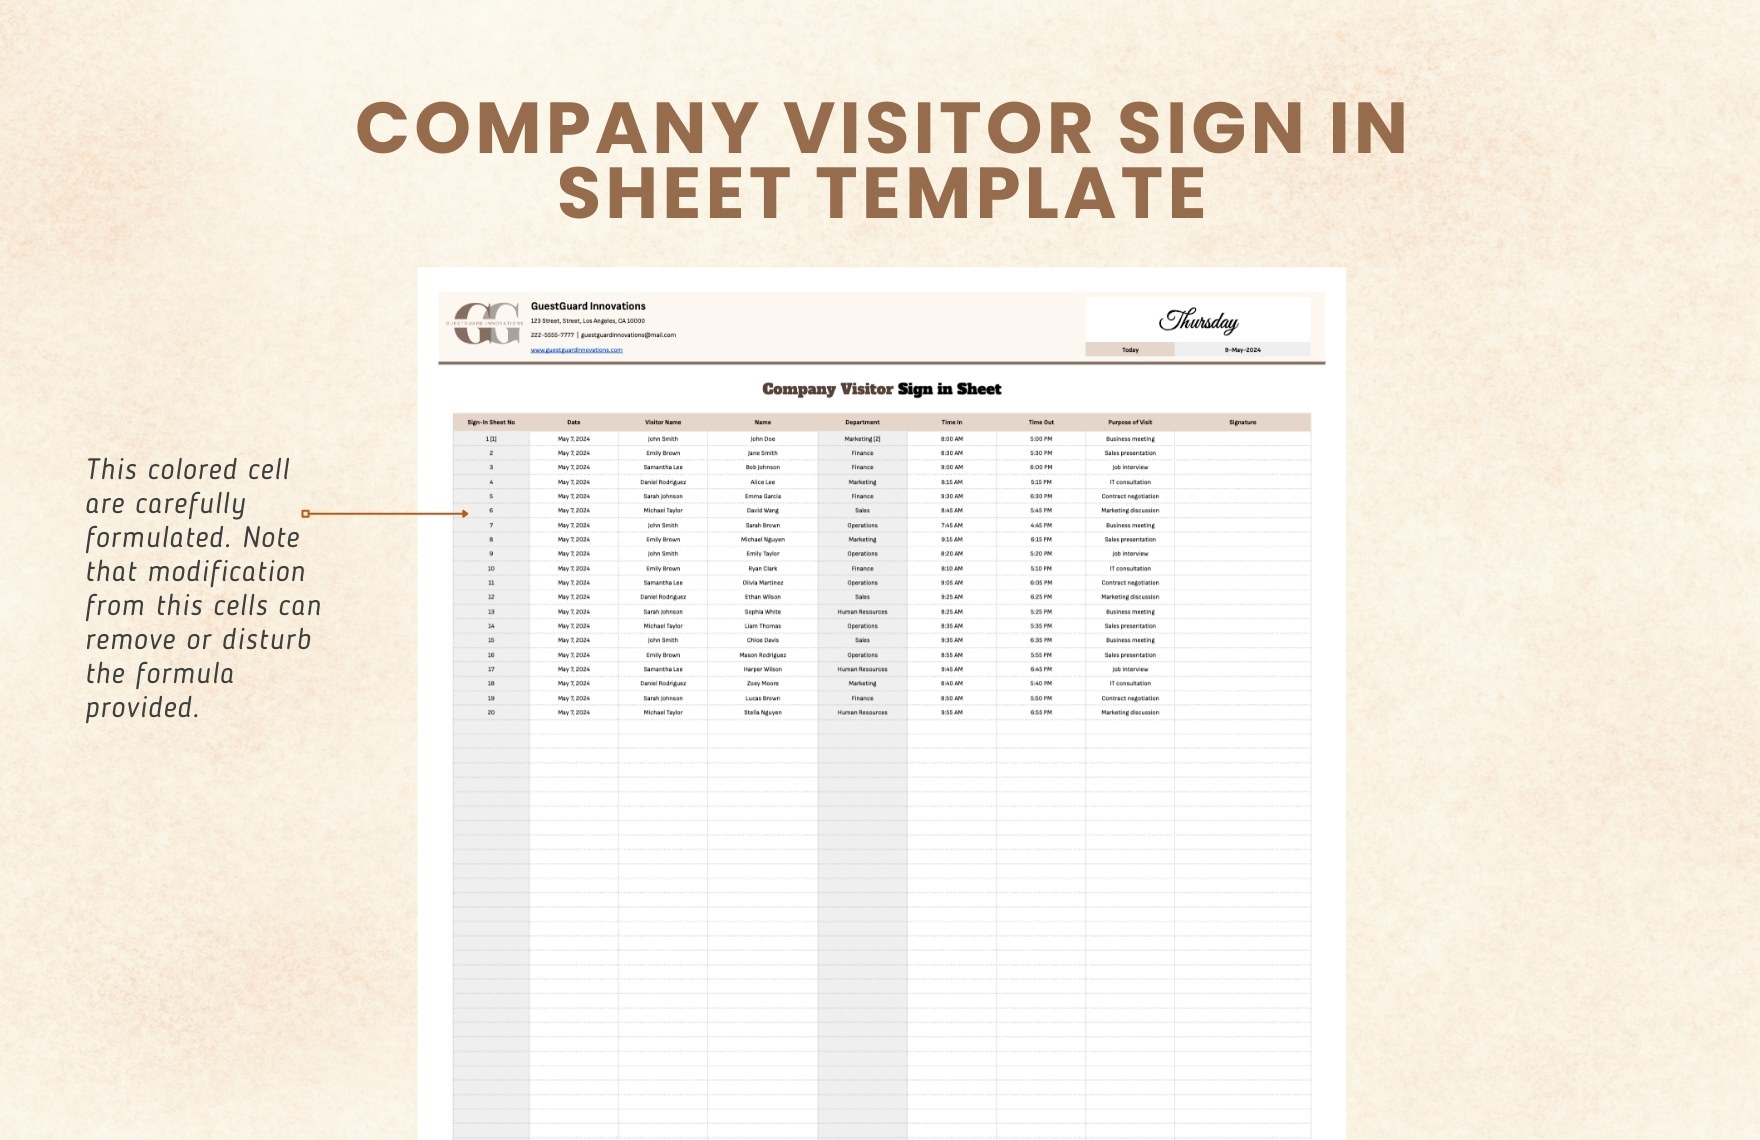 Company Visitor Sign in Sheet Template